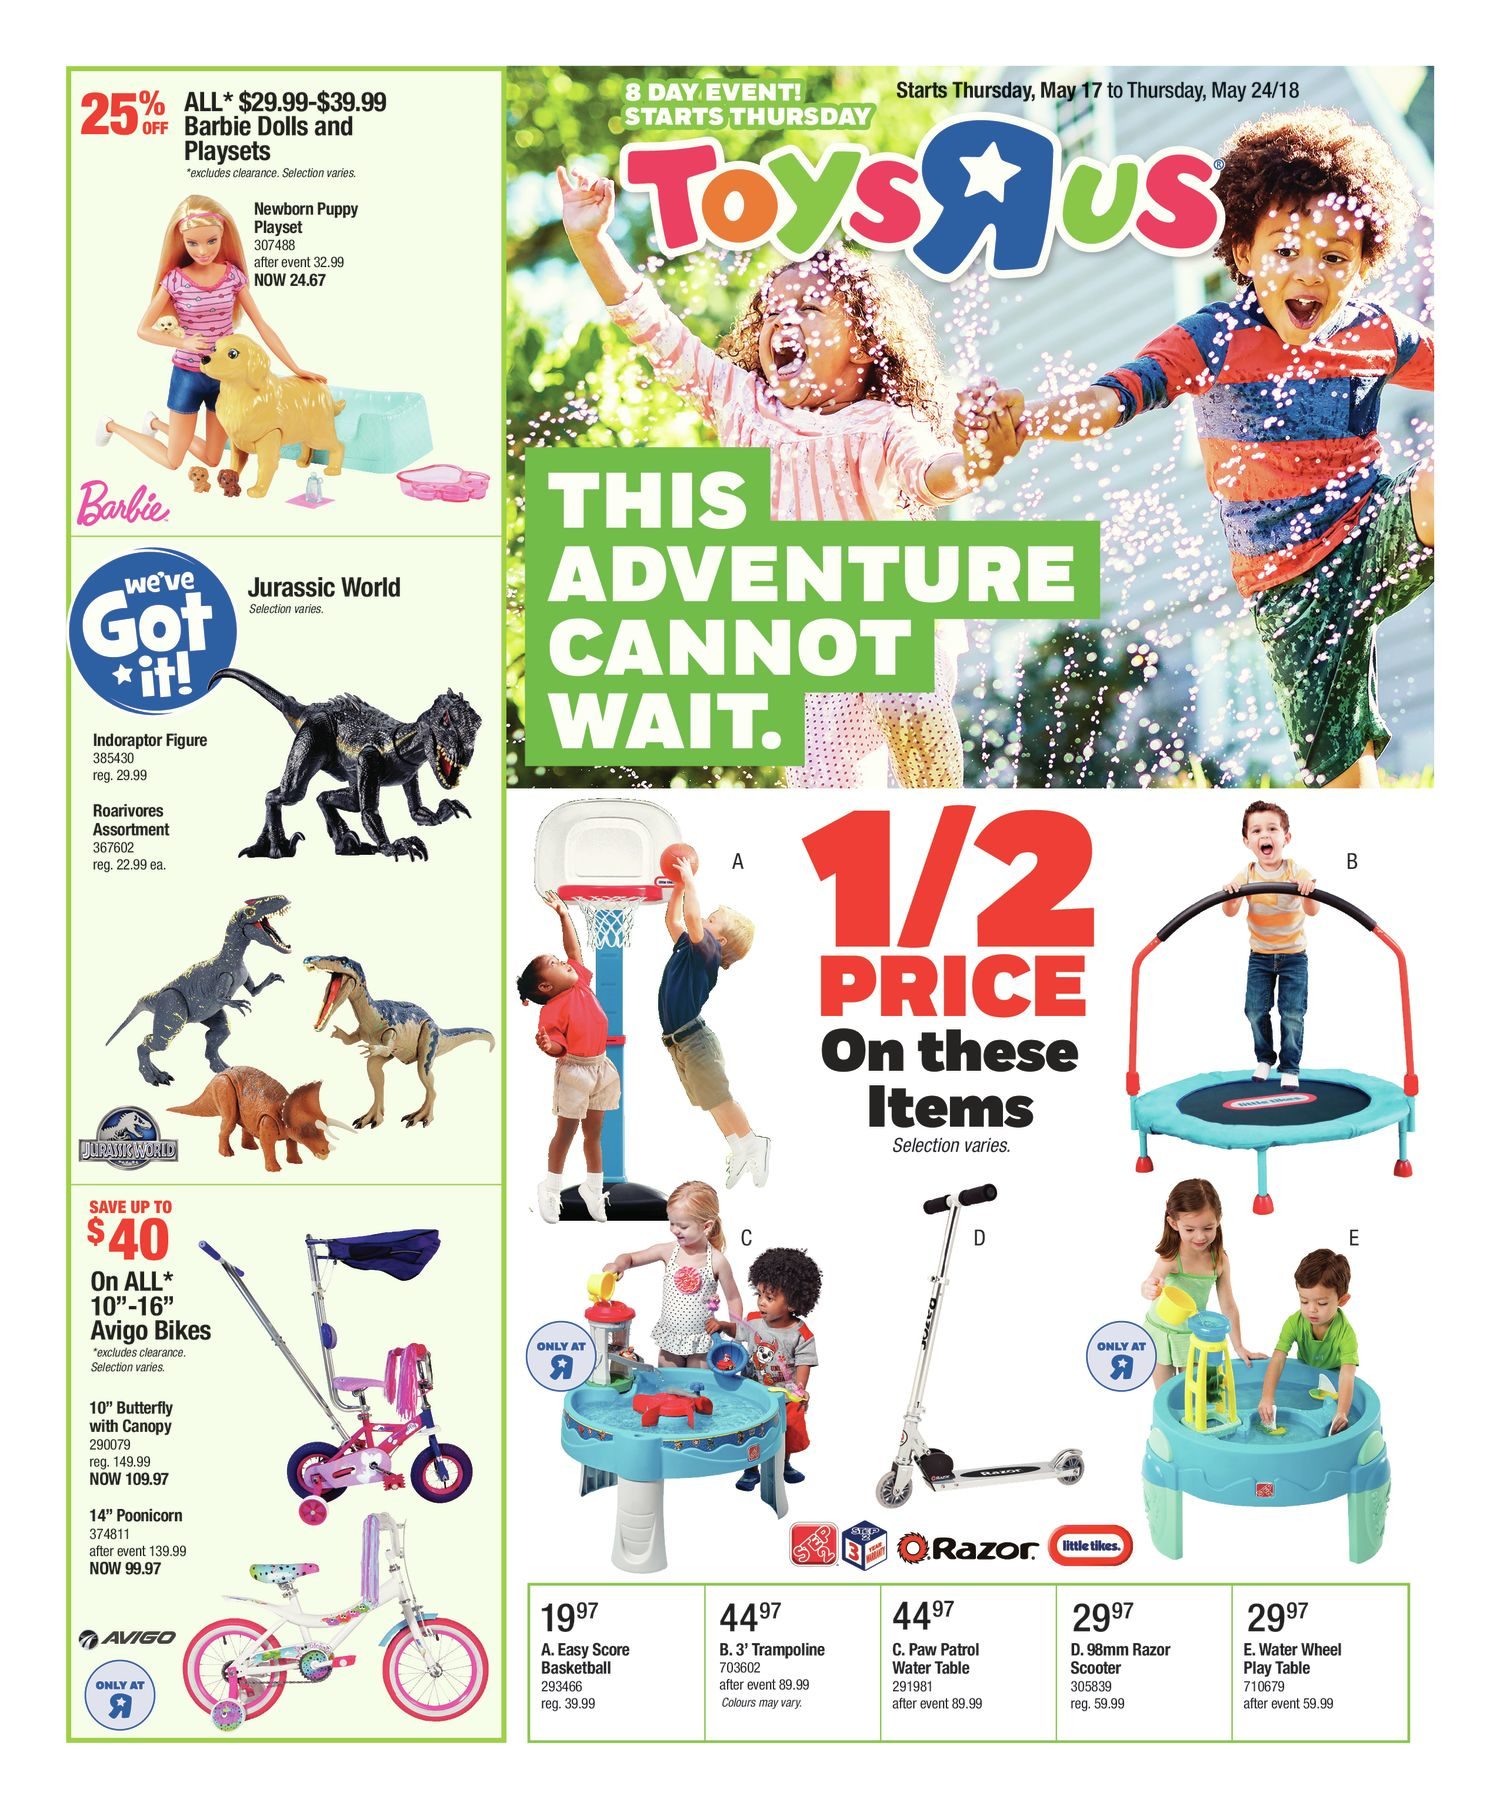 Toys R Us Weekly Flyer 8 Day Event This Adventure Cannot Wait May 17 24 Redflagdeals Com - corn peg race champion roblox